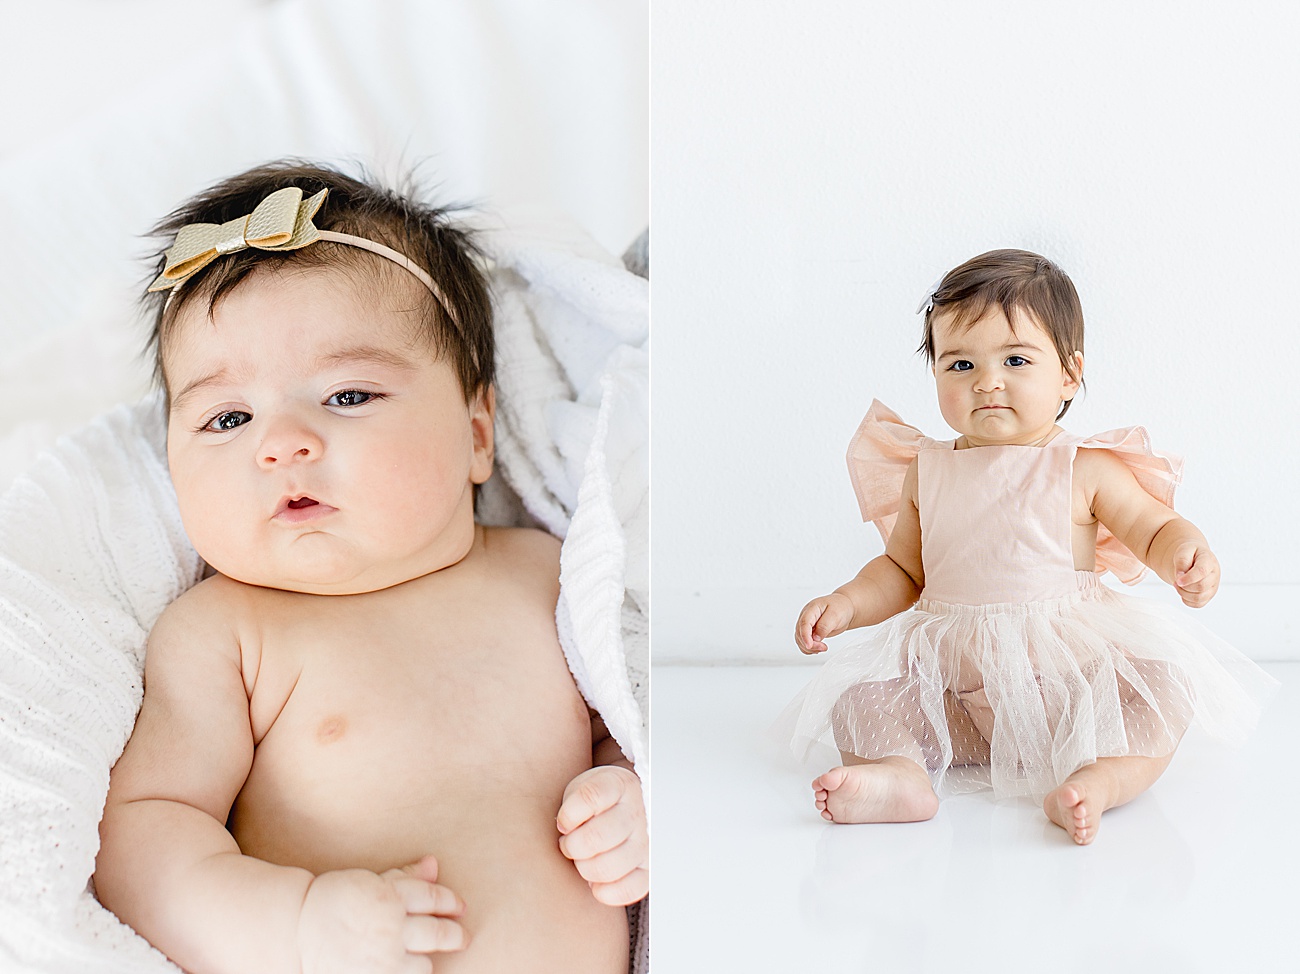 Side-by-side photos of baby and toddler from 3 months old to one year. Photos by Sana Ahmed Photography